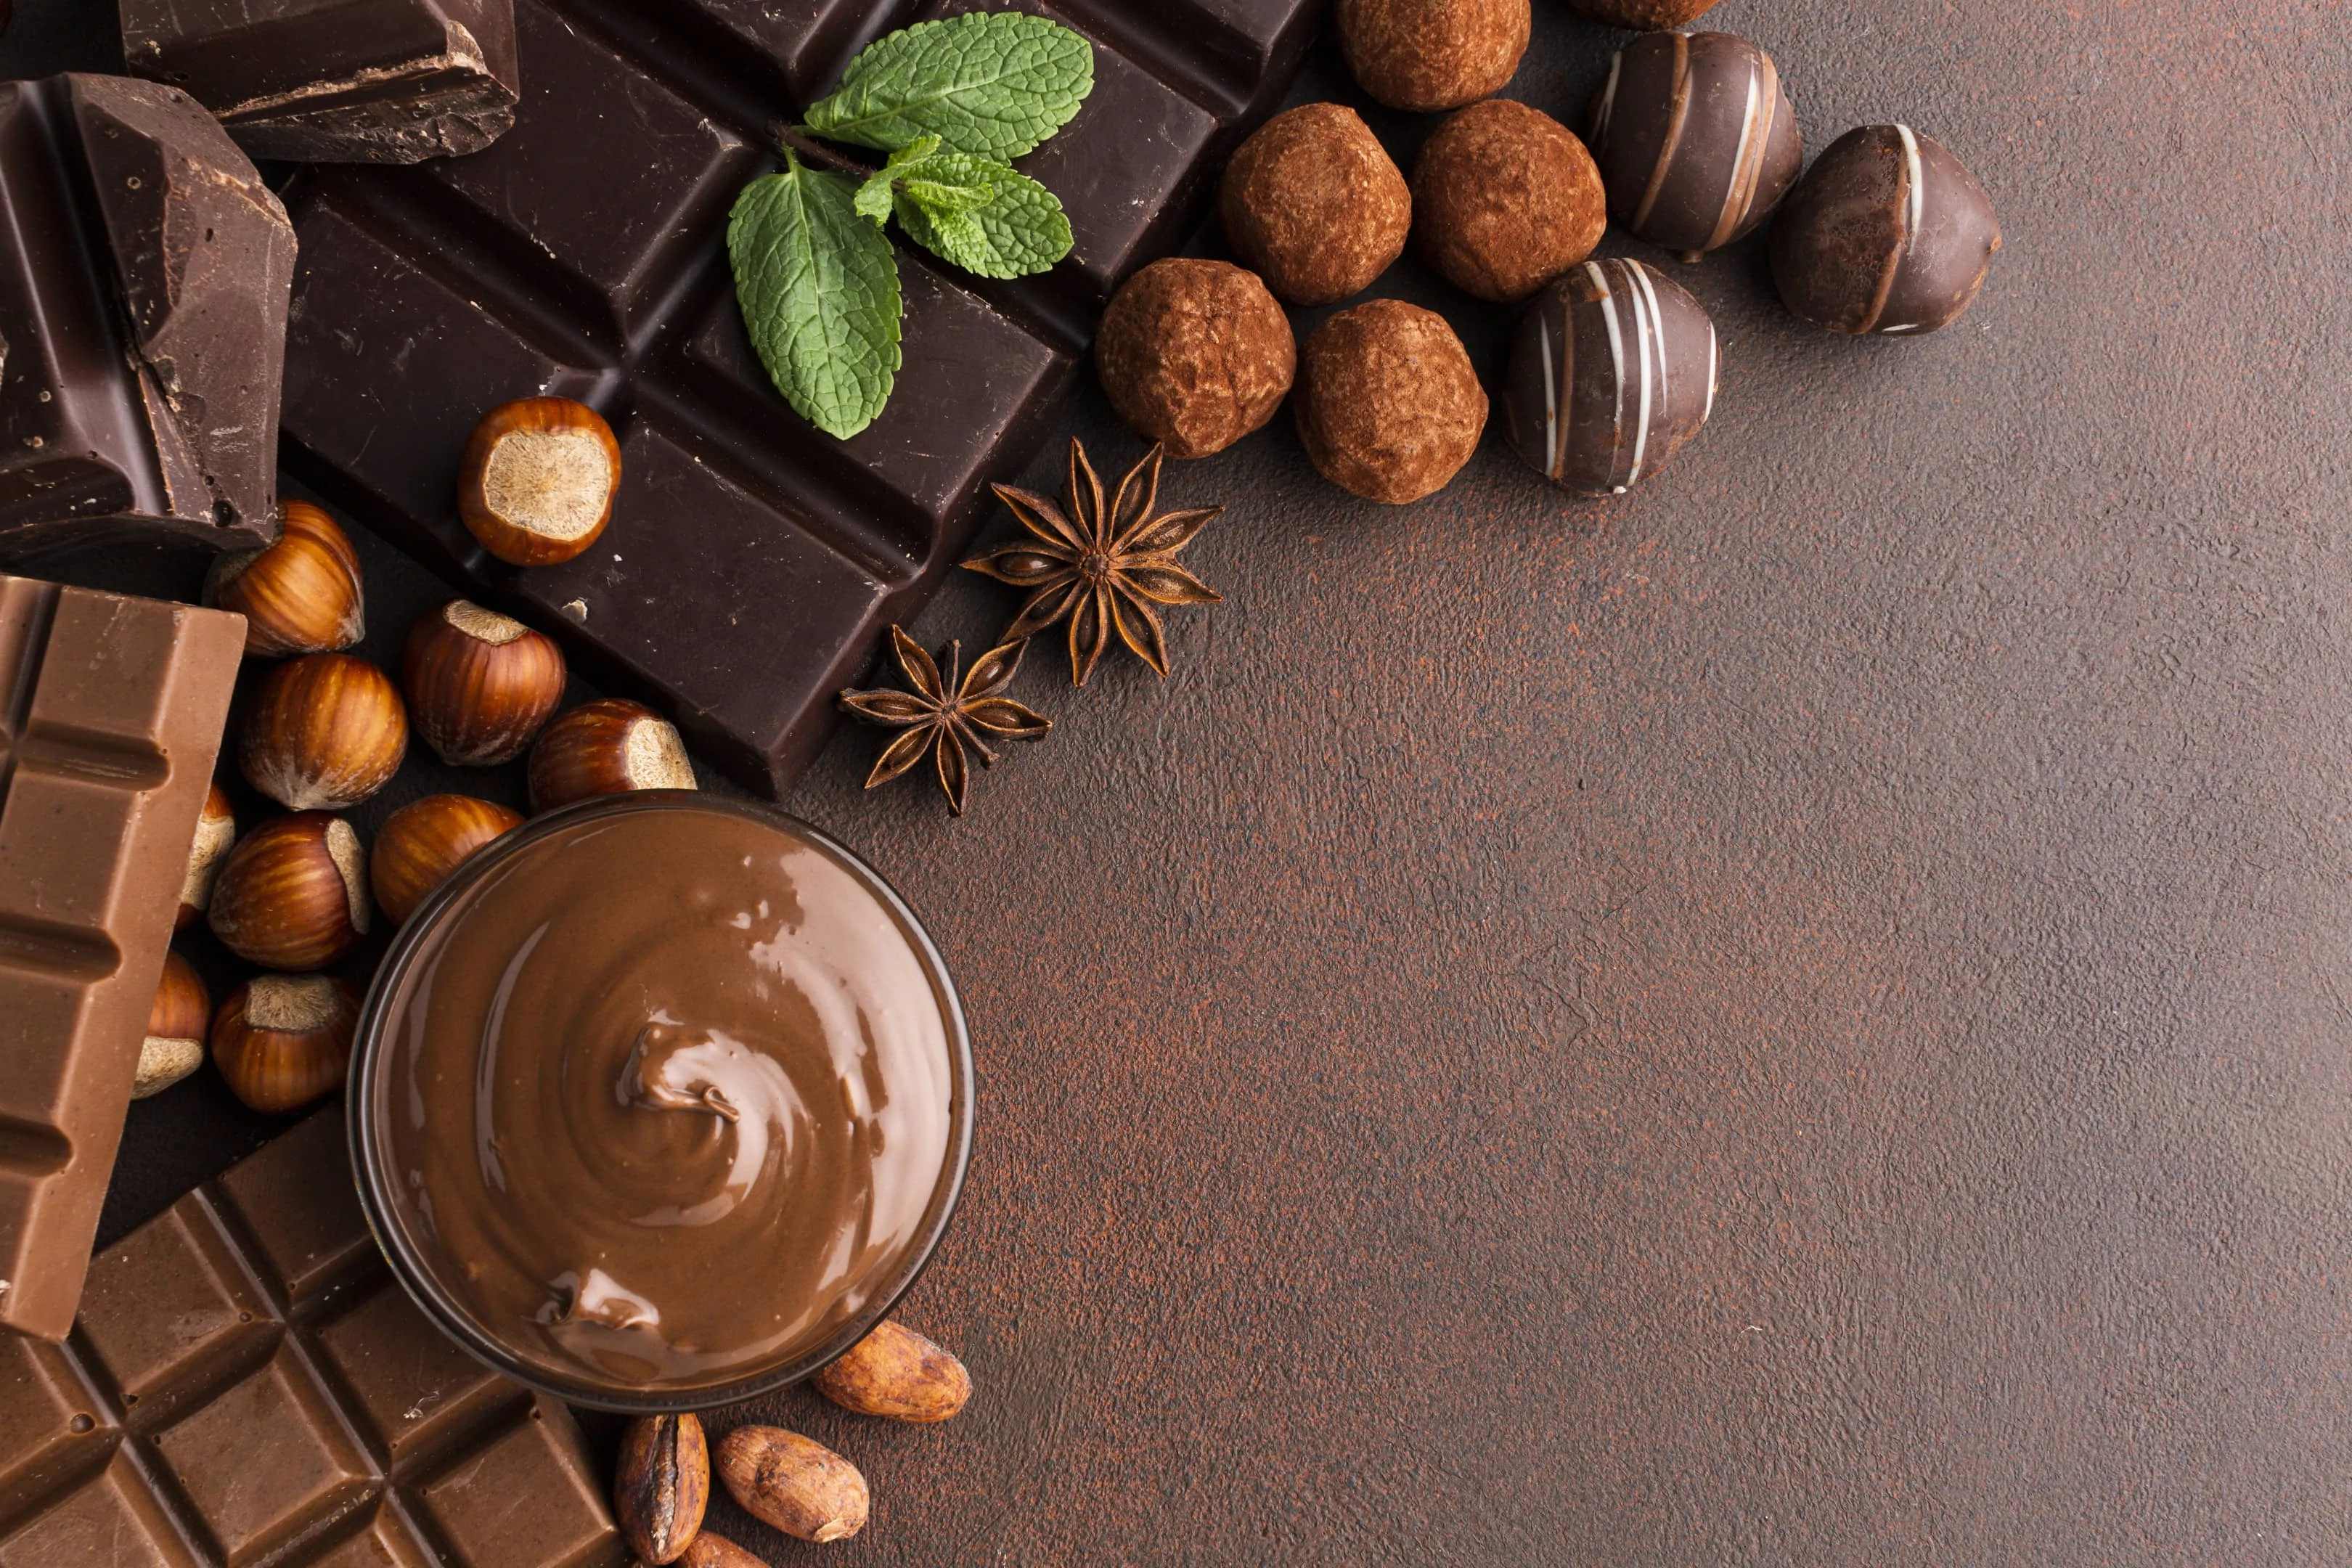 Variety of chocolate on brown surface